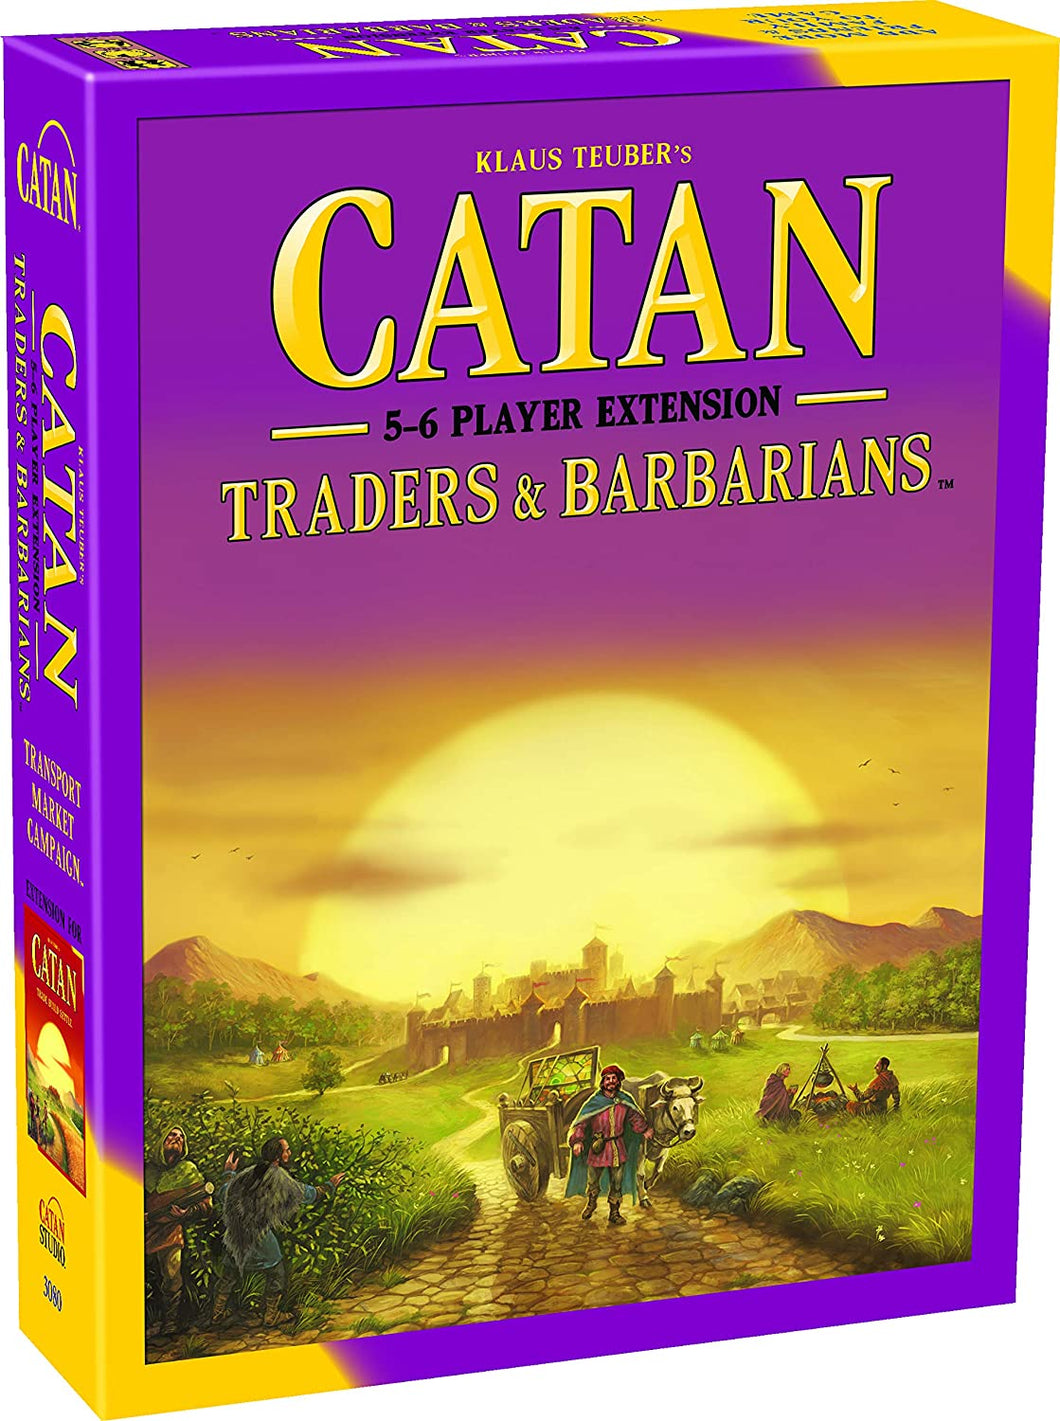 Catan Traders and Barbarians Extension